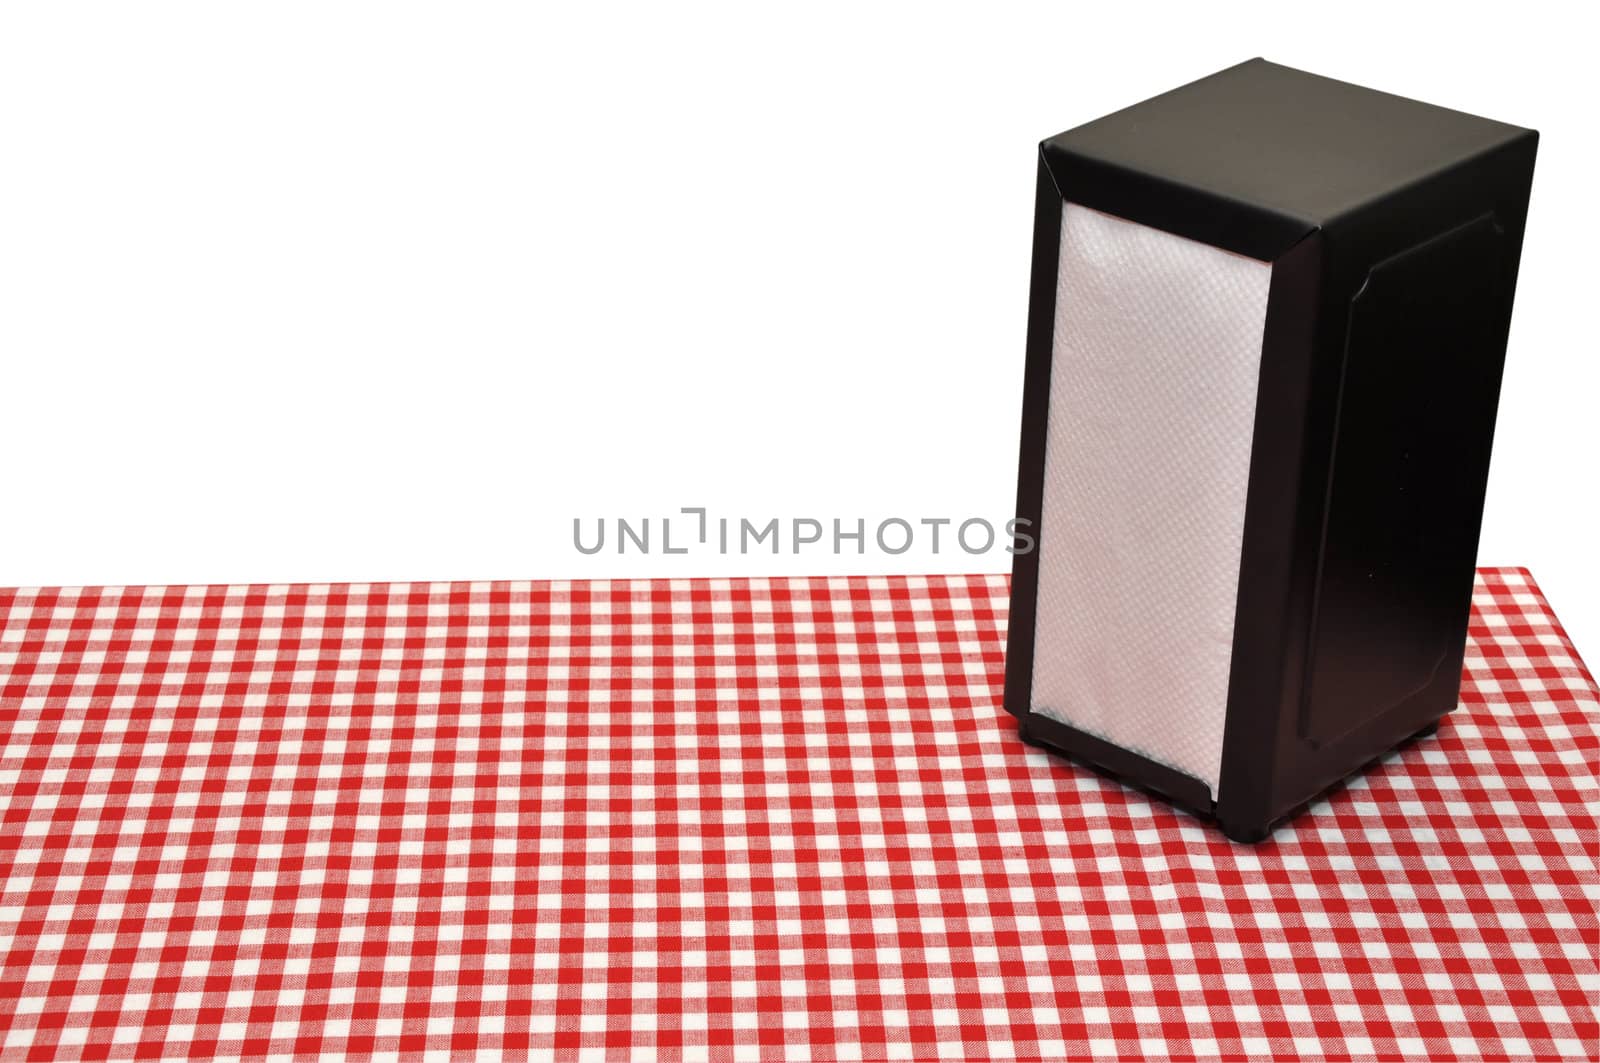 Napkin holder on diner table.  Isolated on white background with clipping path.  